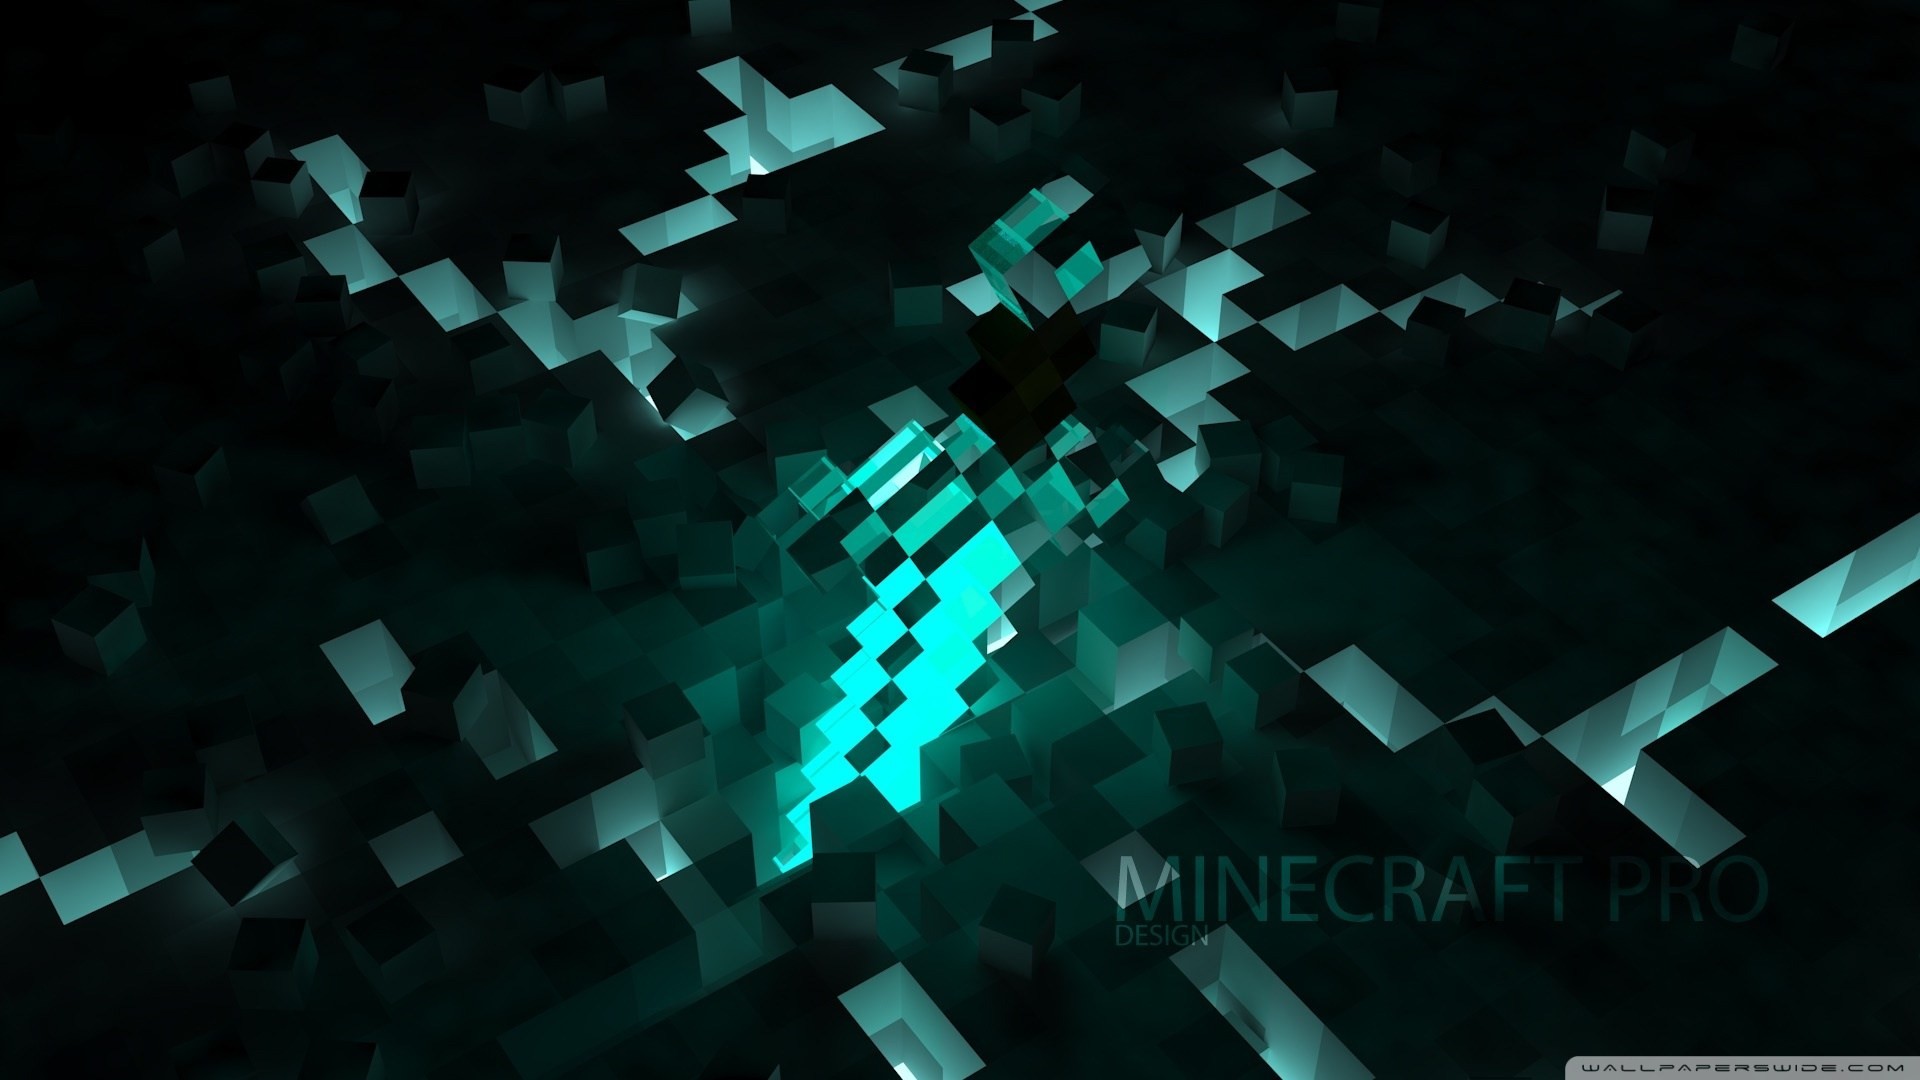 Epic Minecraft Backgrounds 79 Pictures